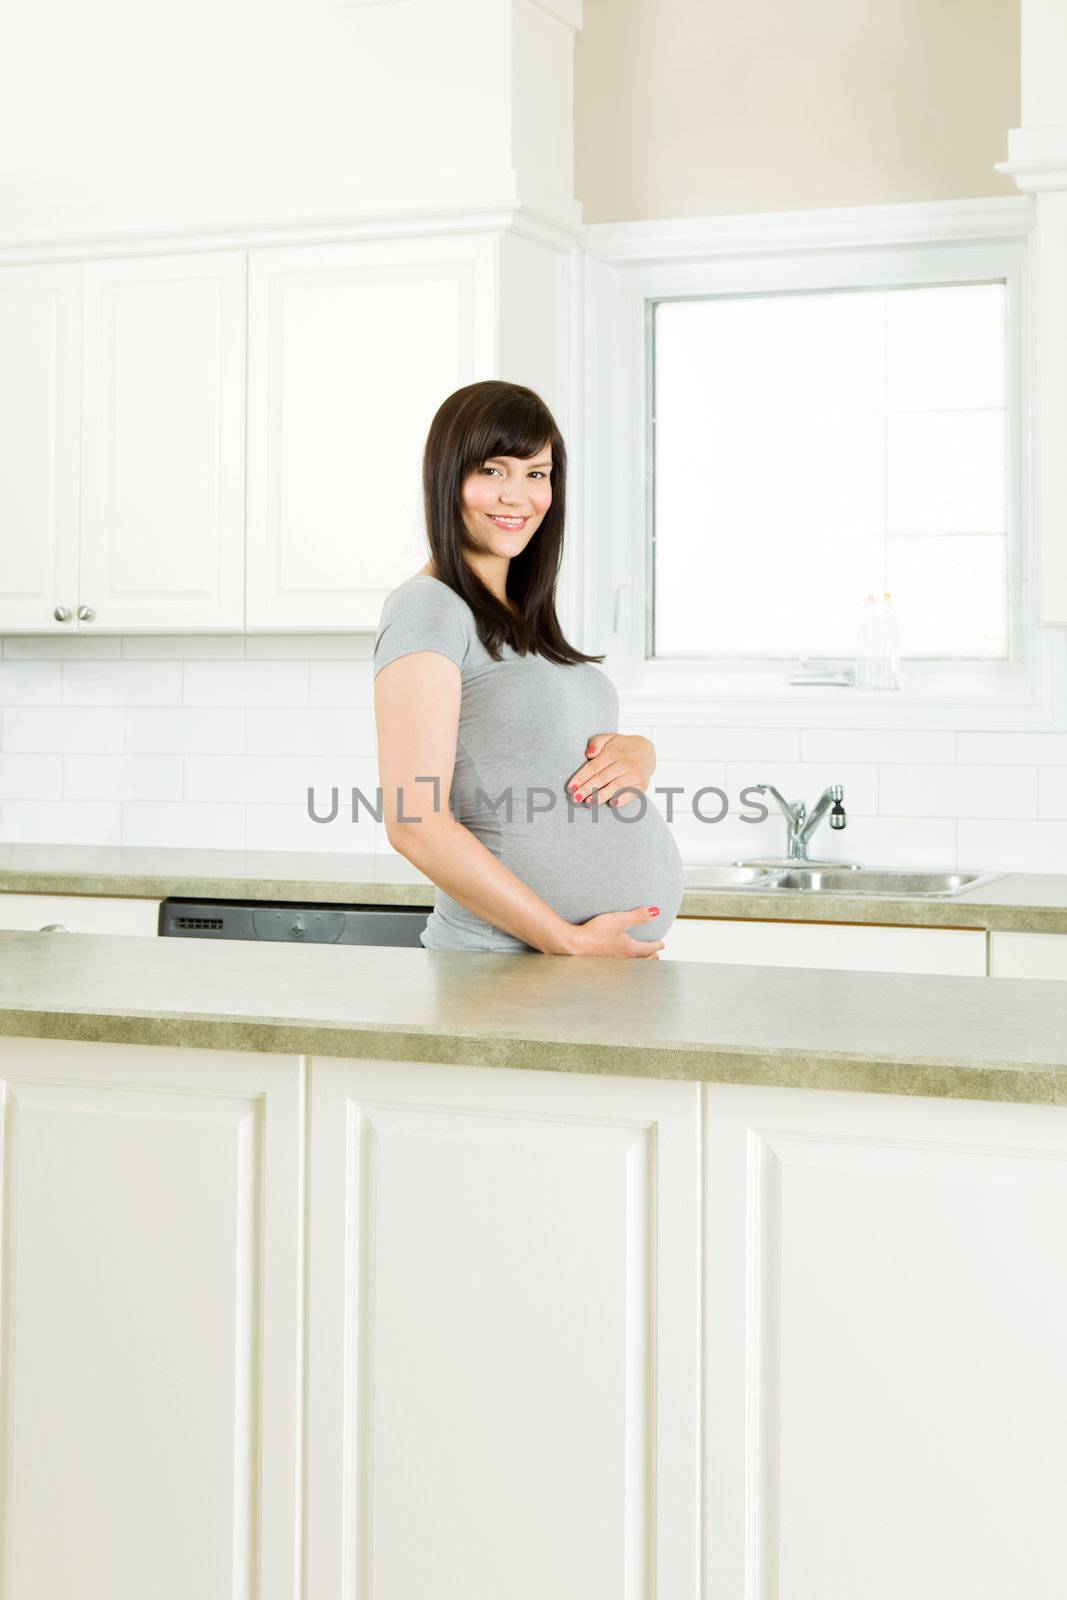 Pregnant Woman in Kitchen by leaf